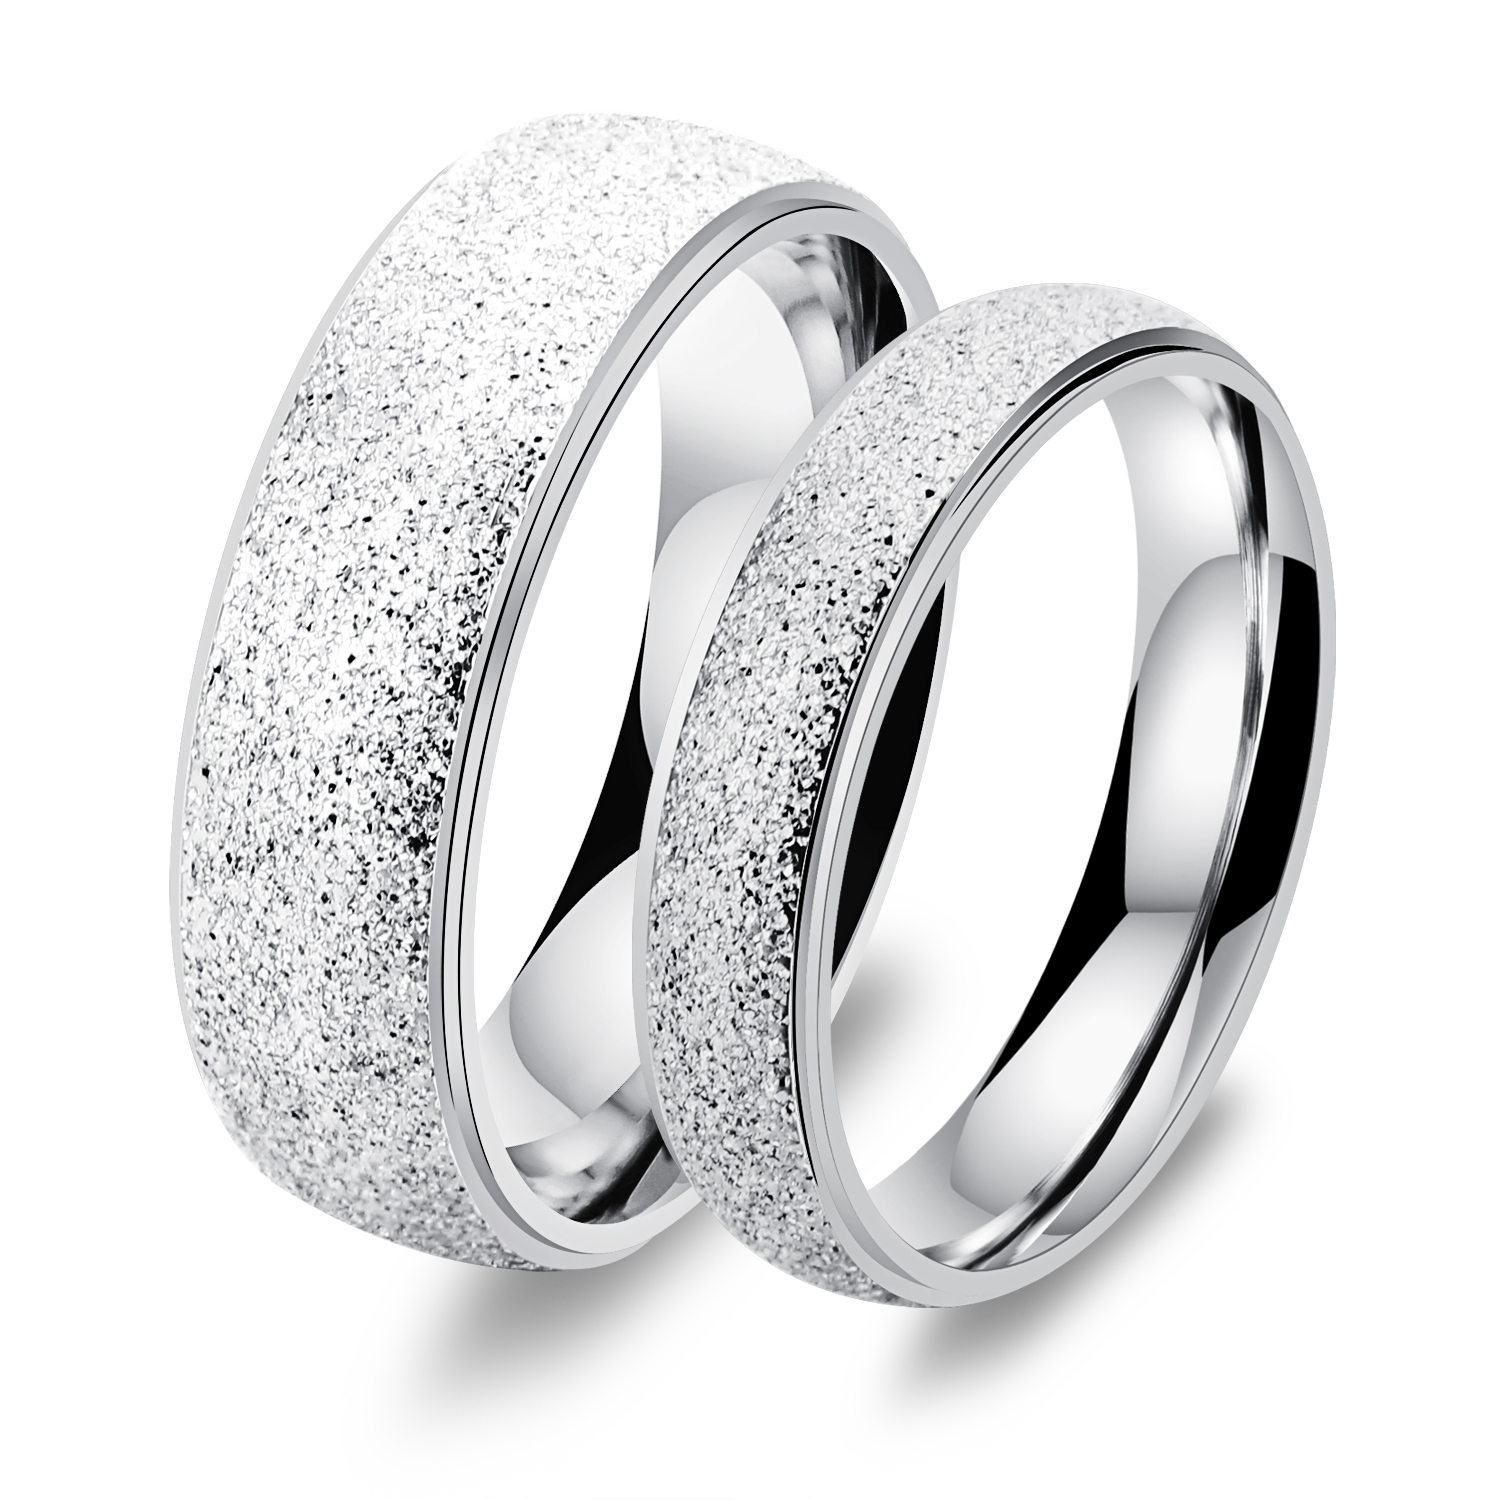 Stainless Steel Matting Wedding Ring Sets for Couple GJ017